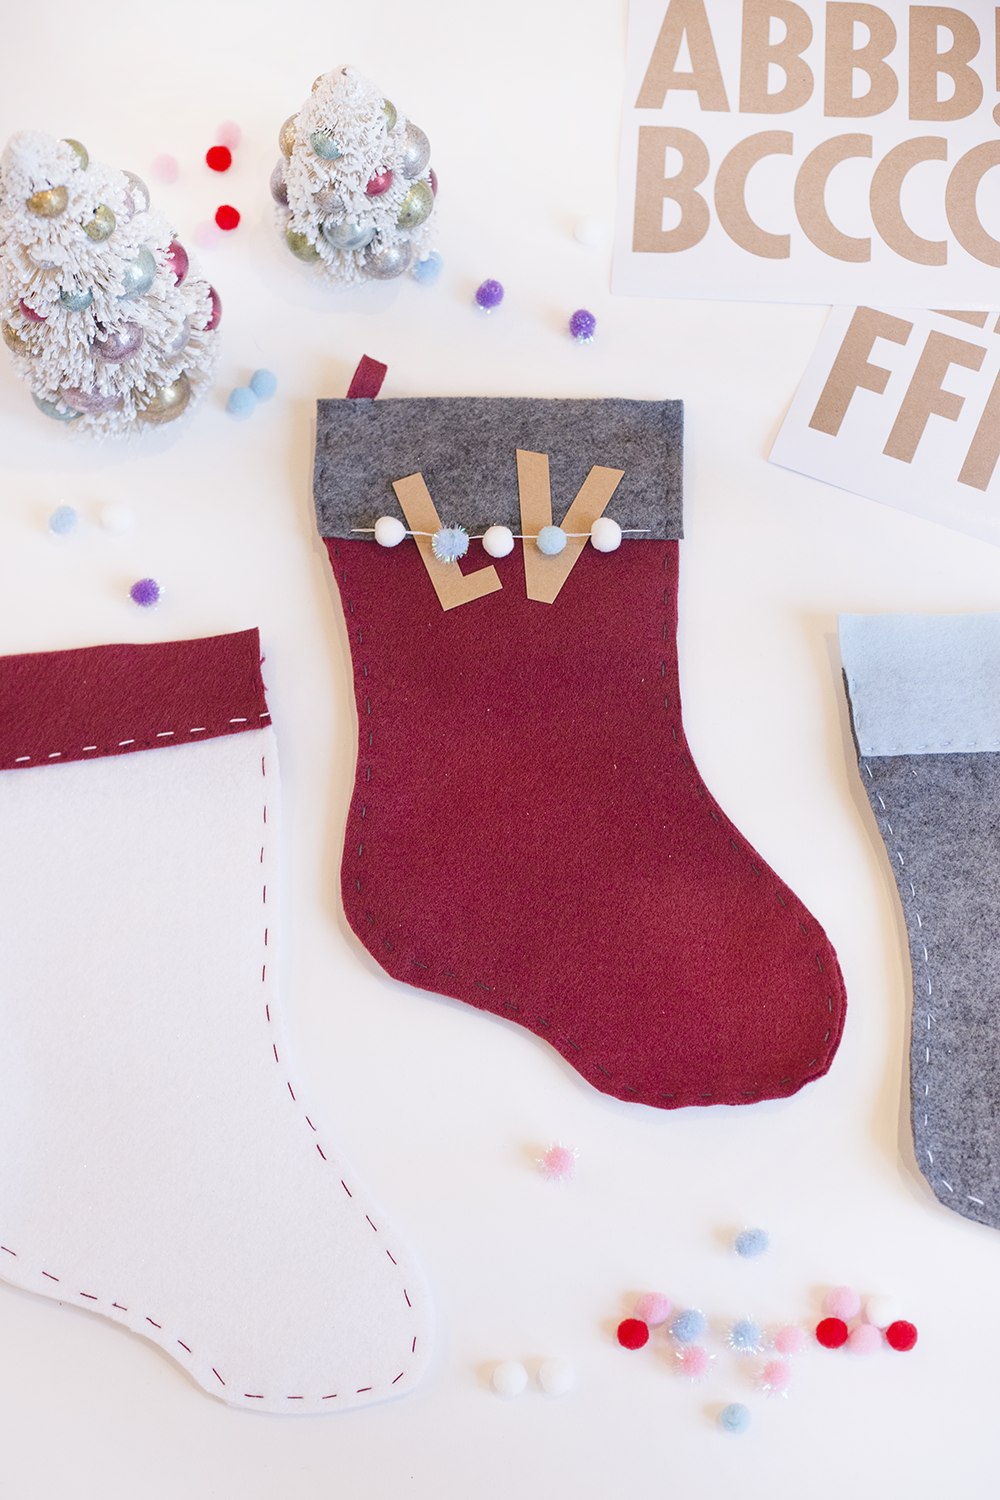 Need an easy holiday DIY? Try our hand-stitched felt stocking! It's cute, inexpensive, and only takes about an hour. Click through to read the steps and add some festive adorableness to your mantle!